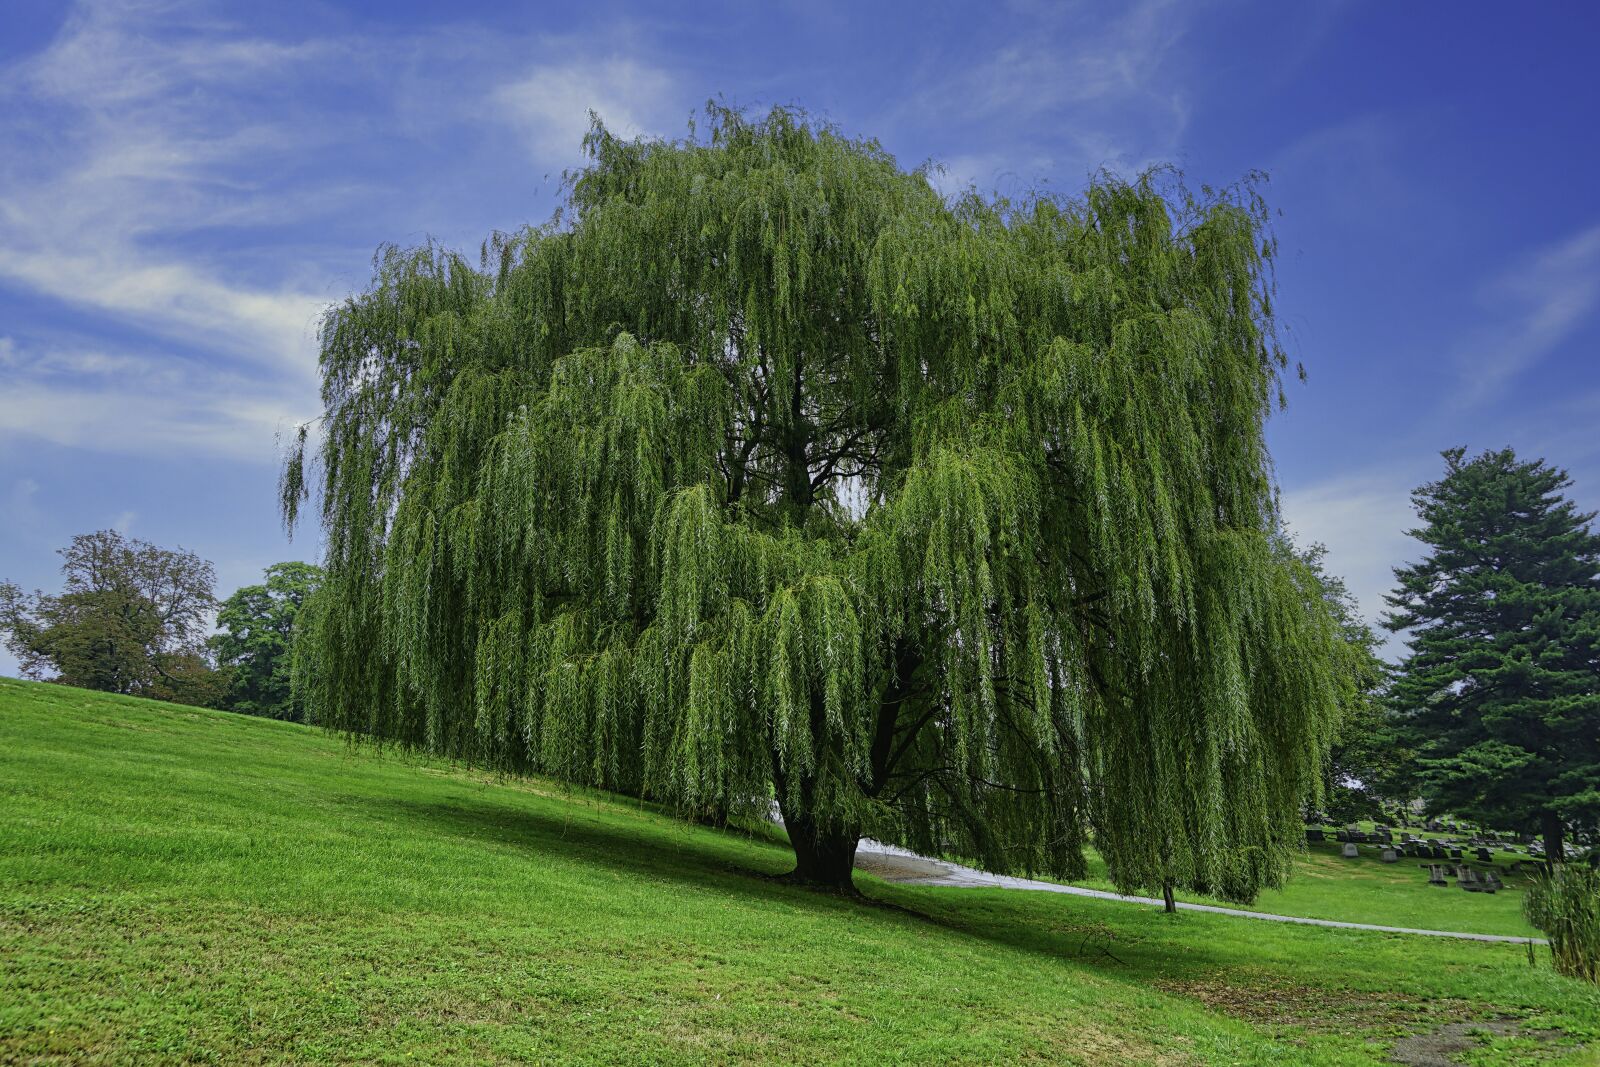 Sony a7 II sample photo. Weeping willow, tree, landscape photography